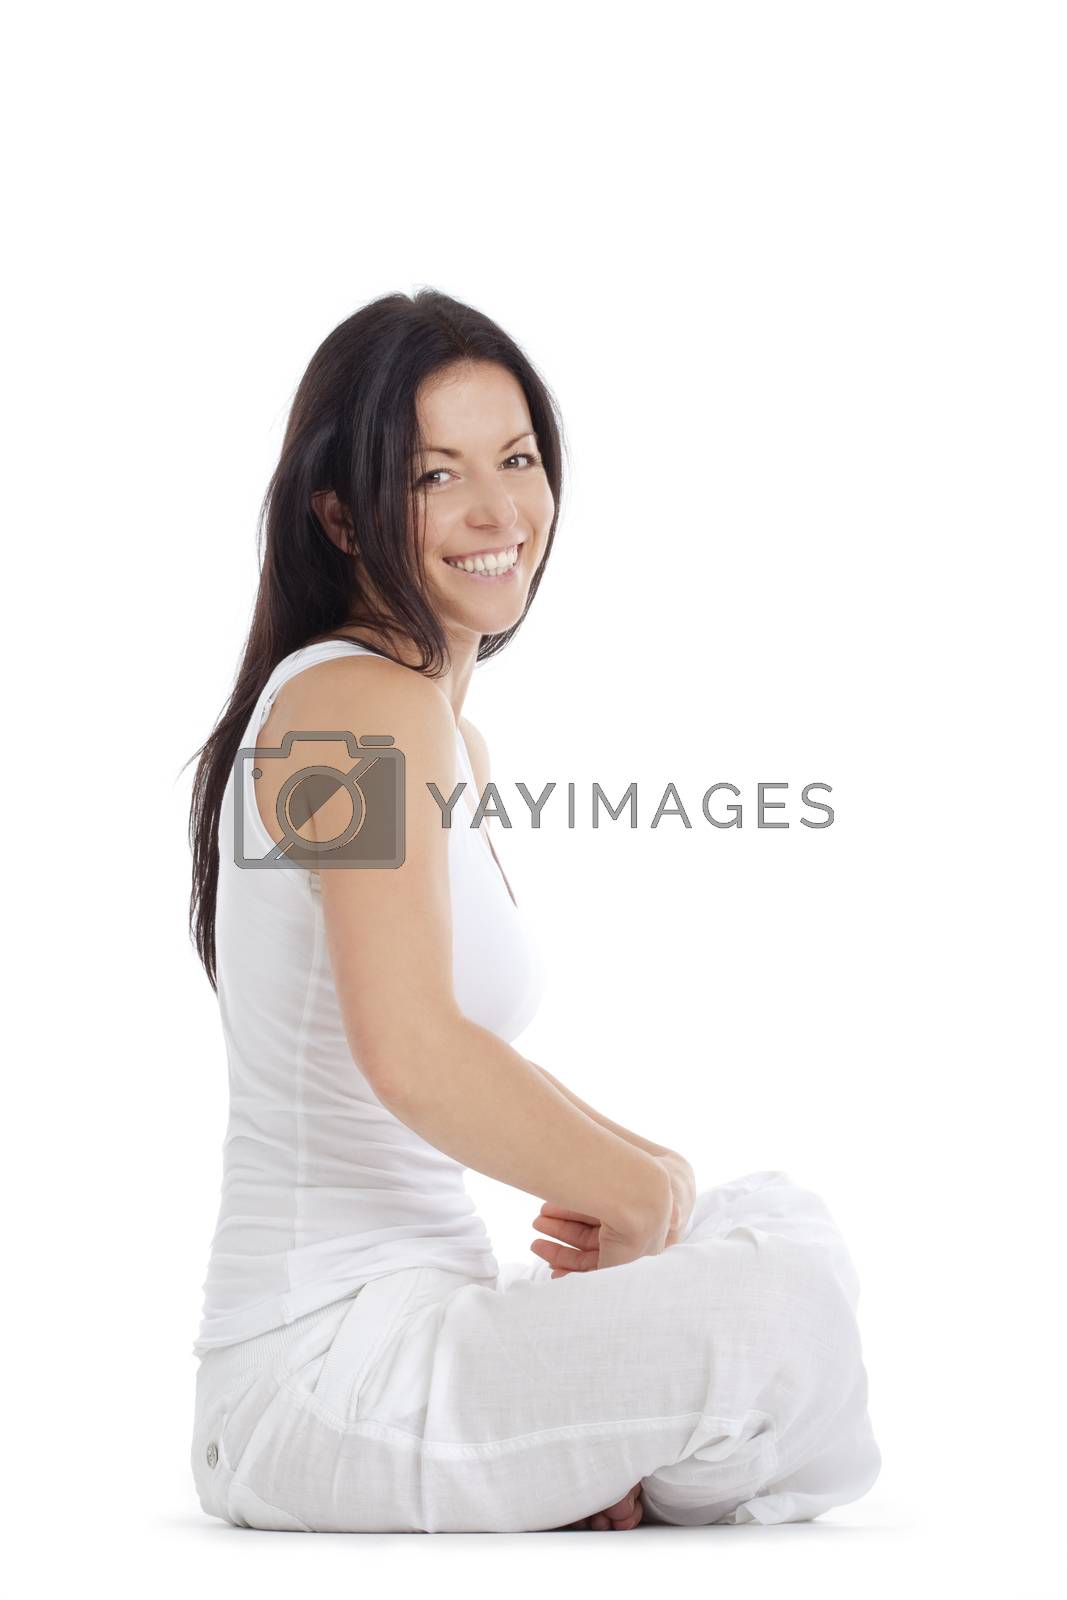 Royalty free image of woman smiling by courtyardpix